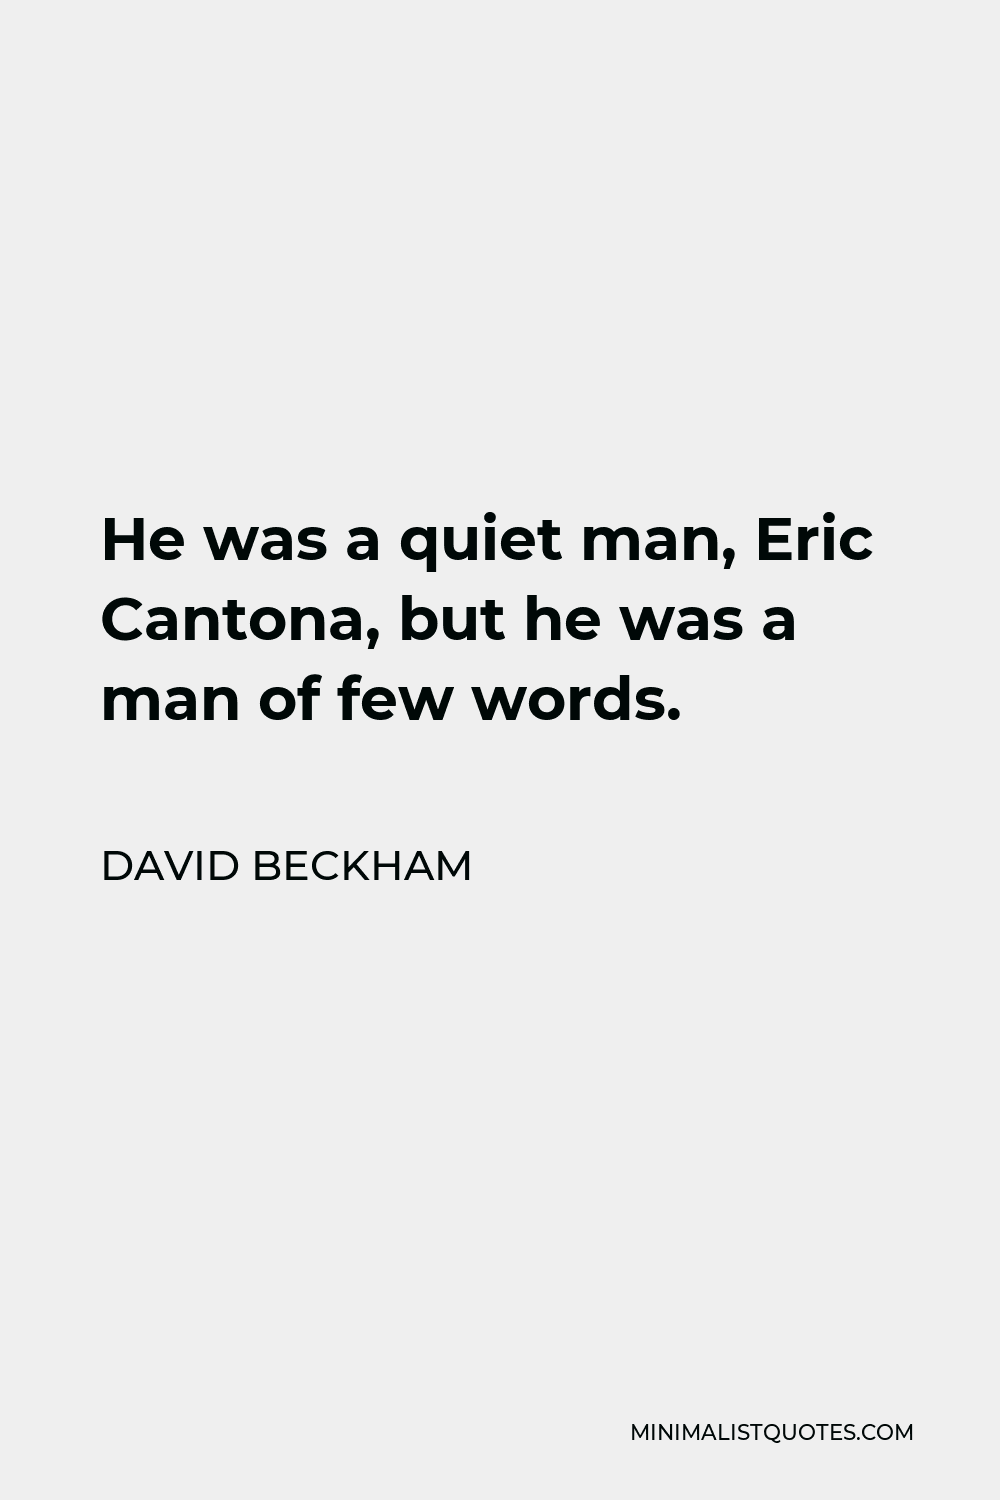 David Beckham Quote - He was a quiet man, Eric Cantona, but he was a man of few words.